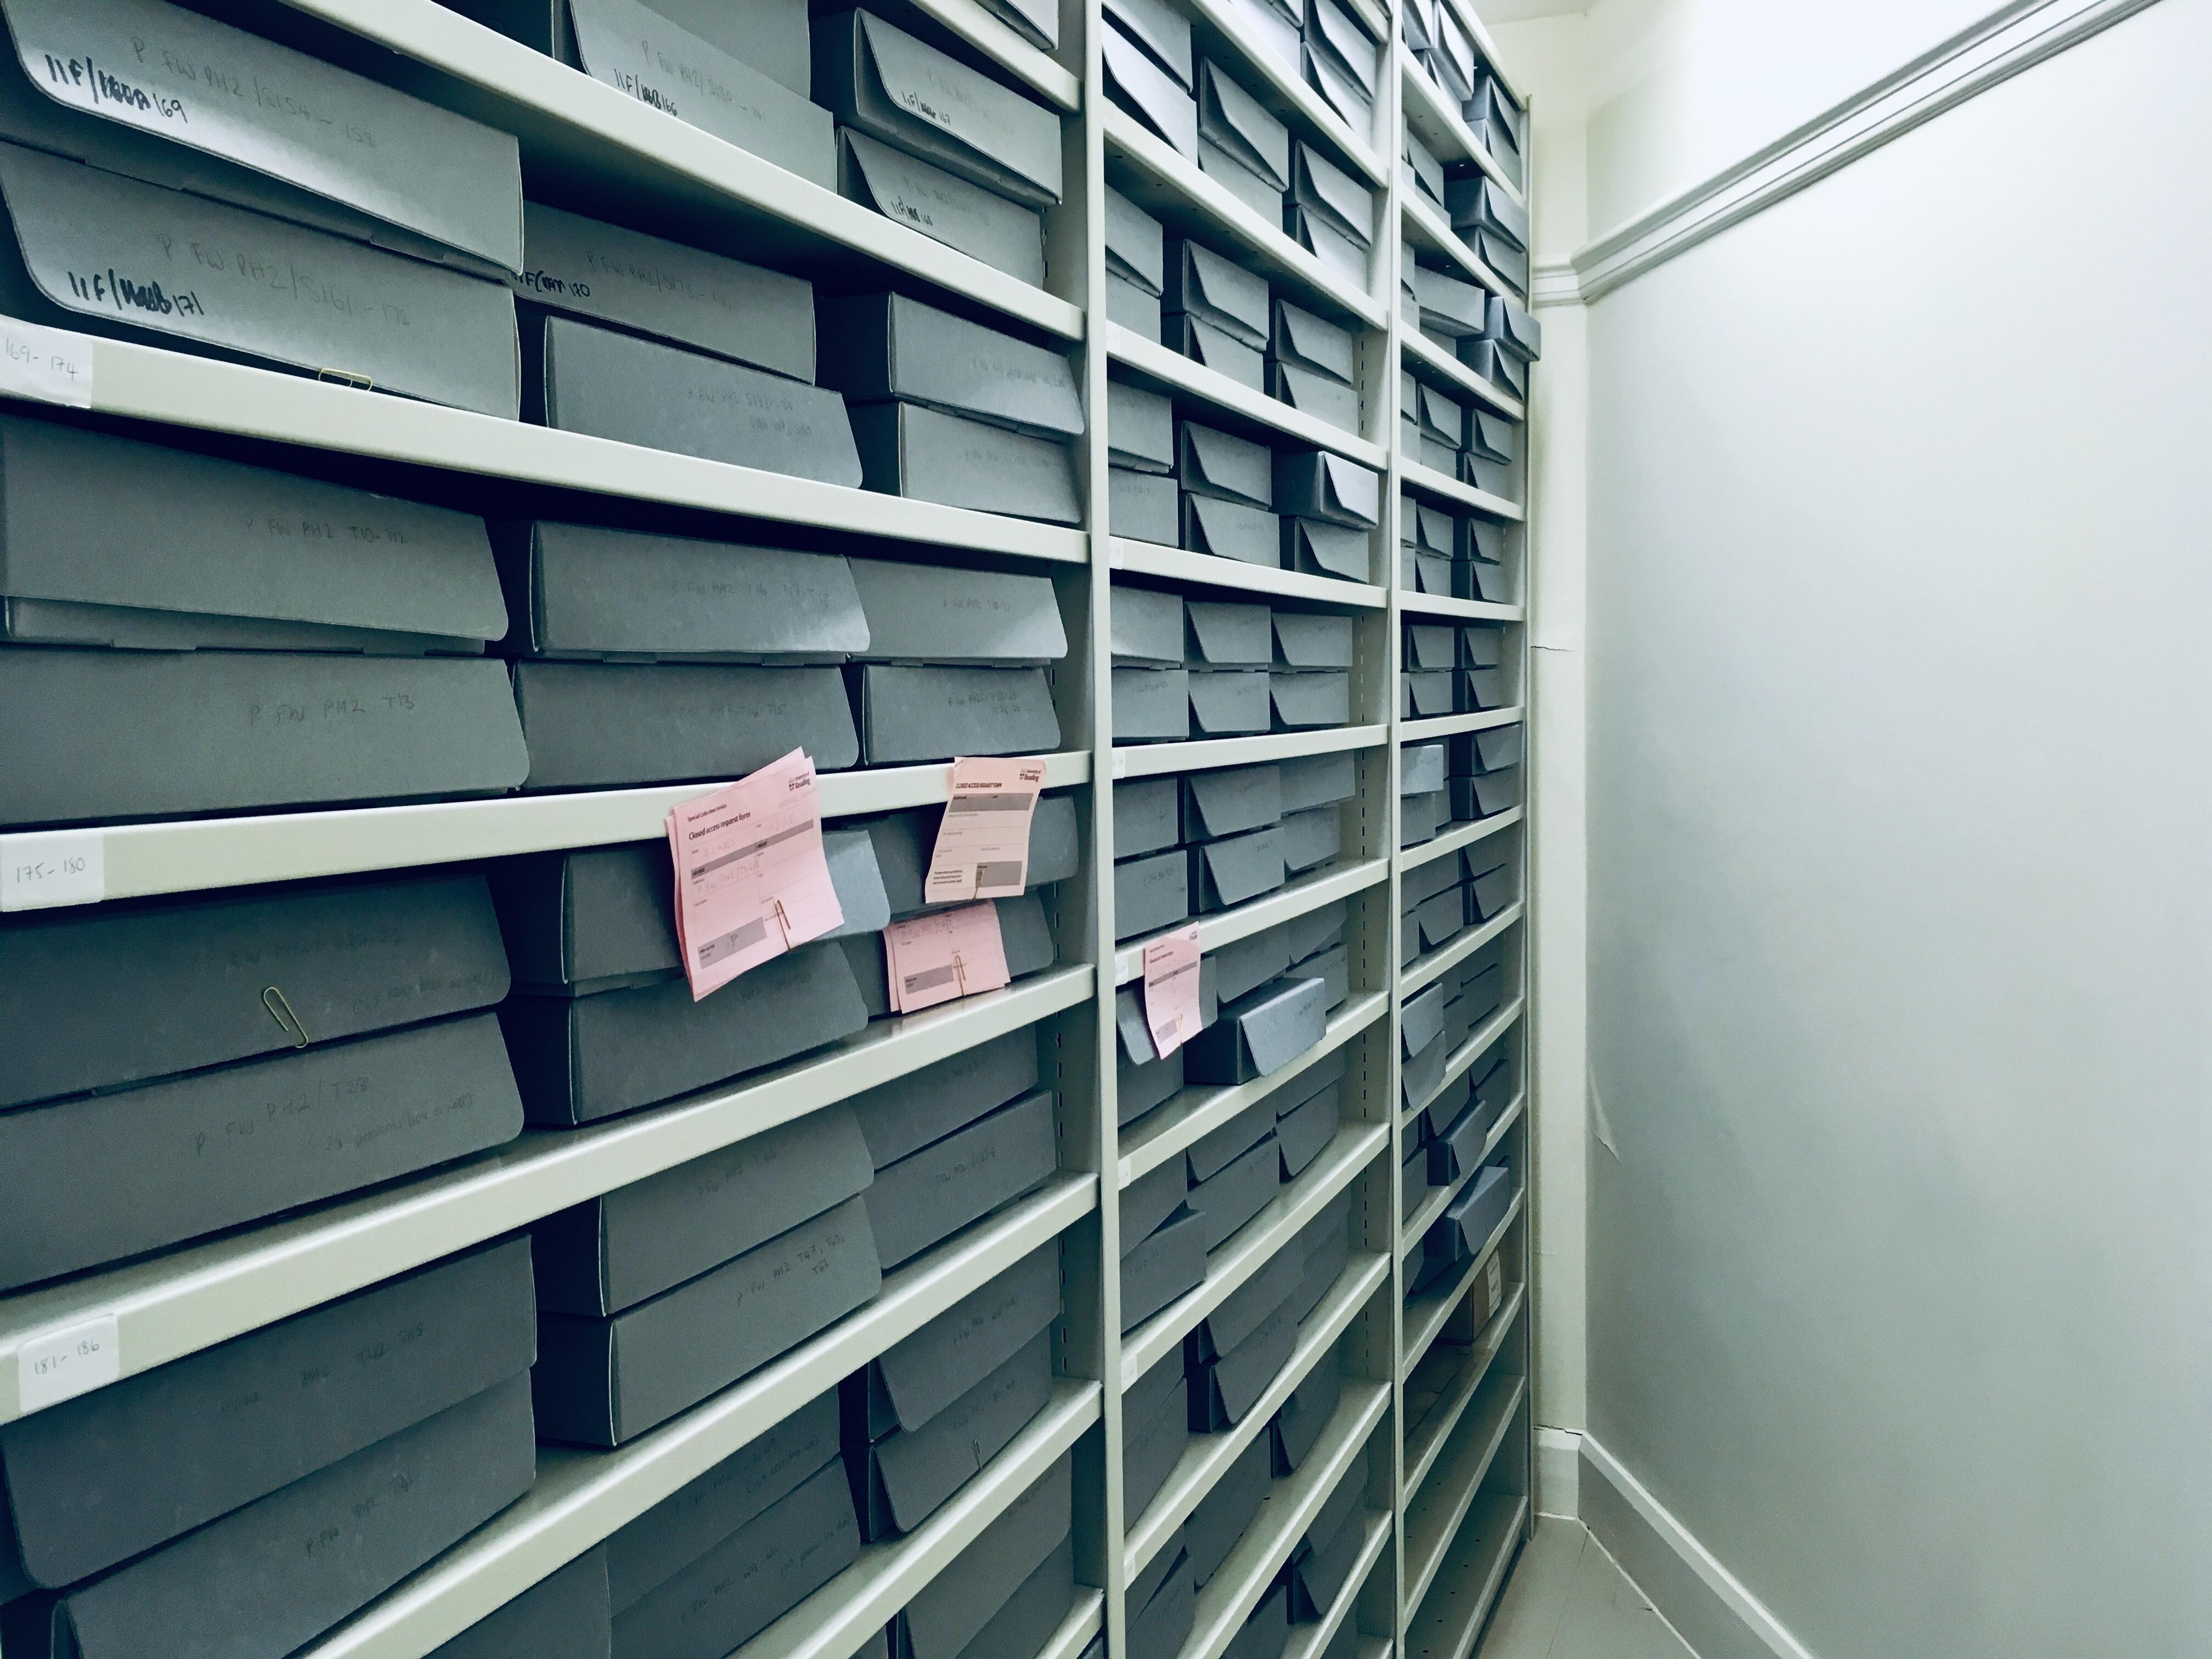 Image of a row of shelves holding archive boxes